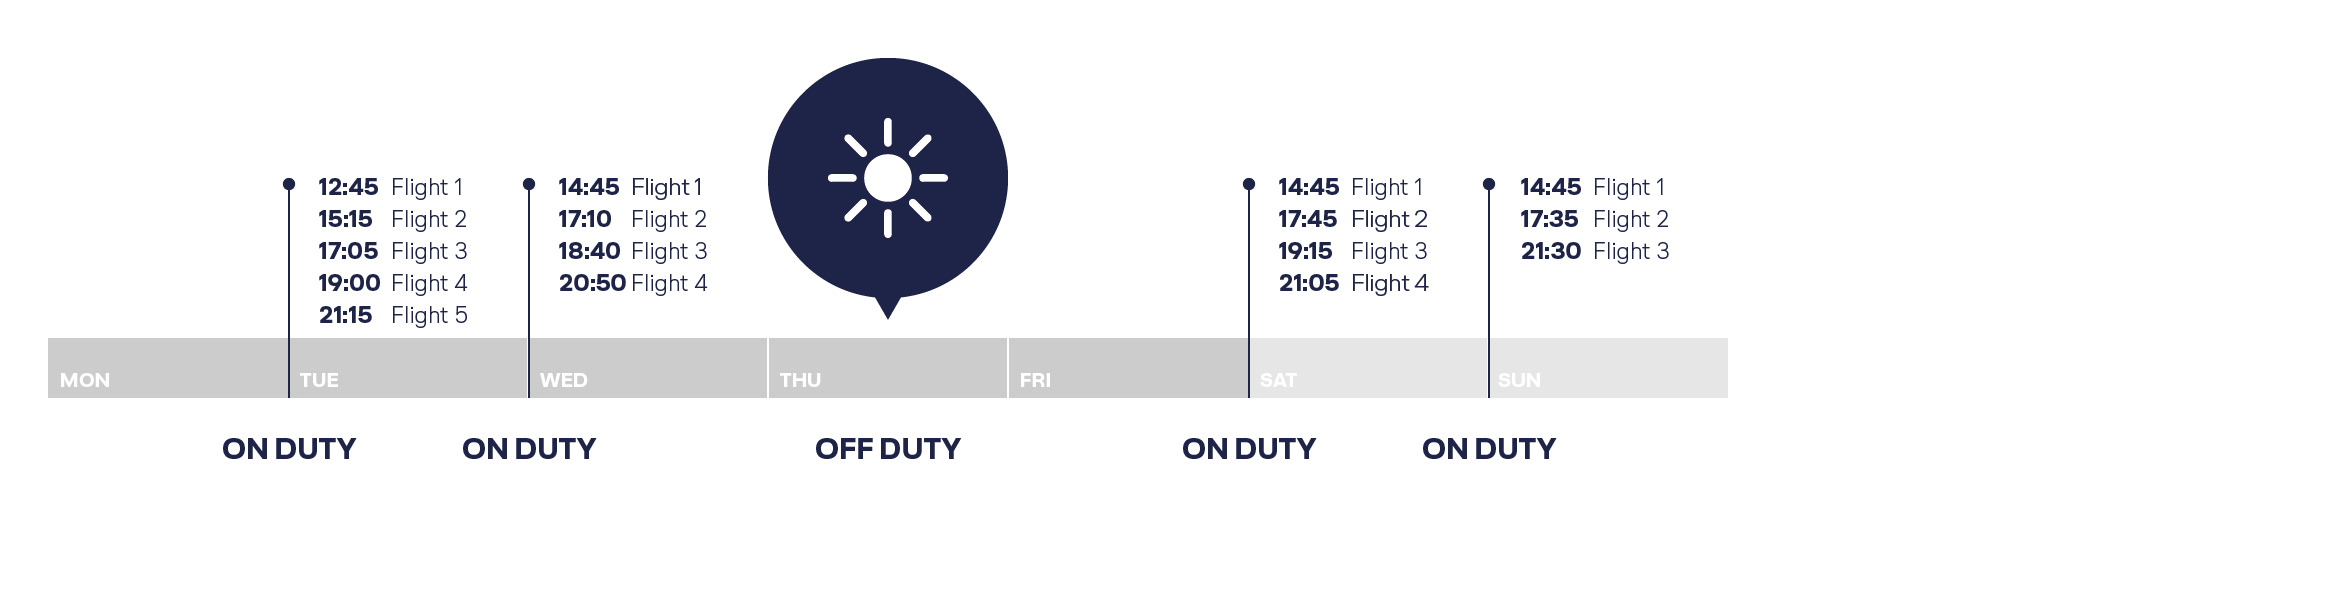  Exemplary flight plan for short-haul routes.